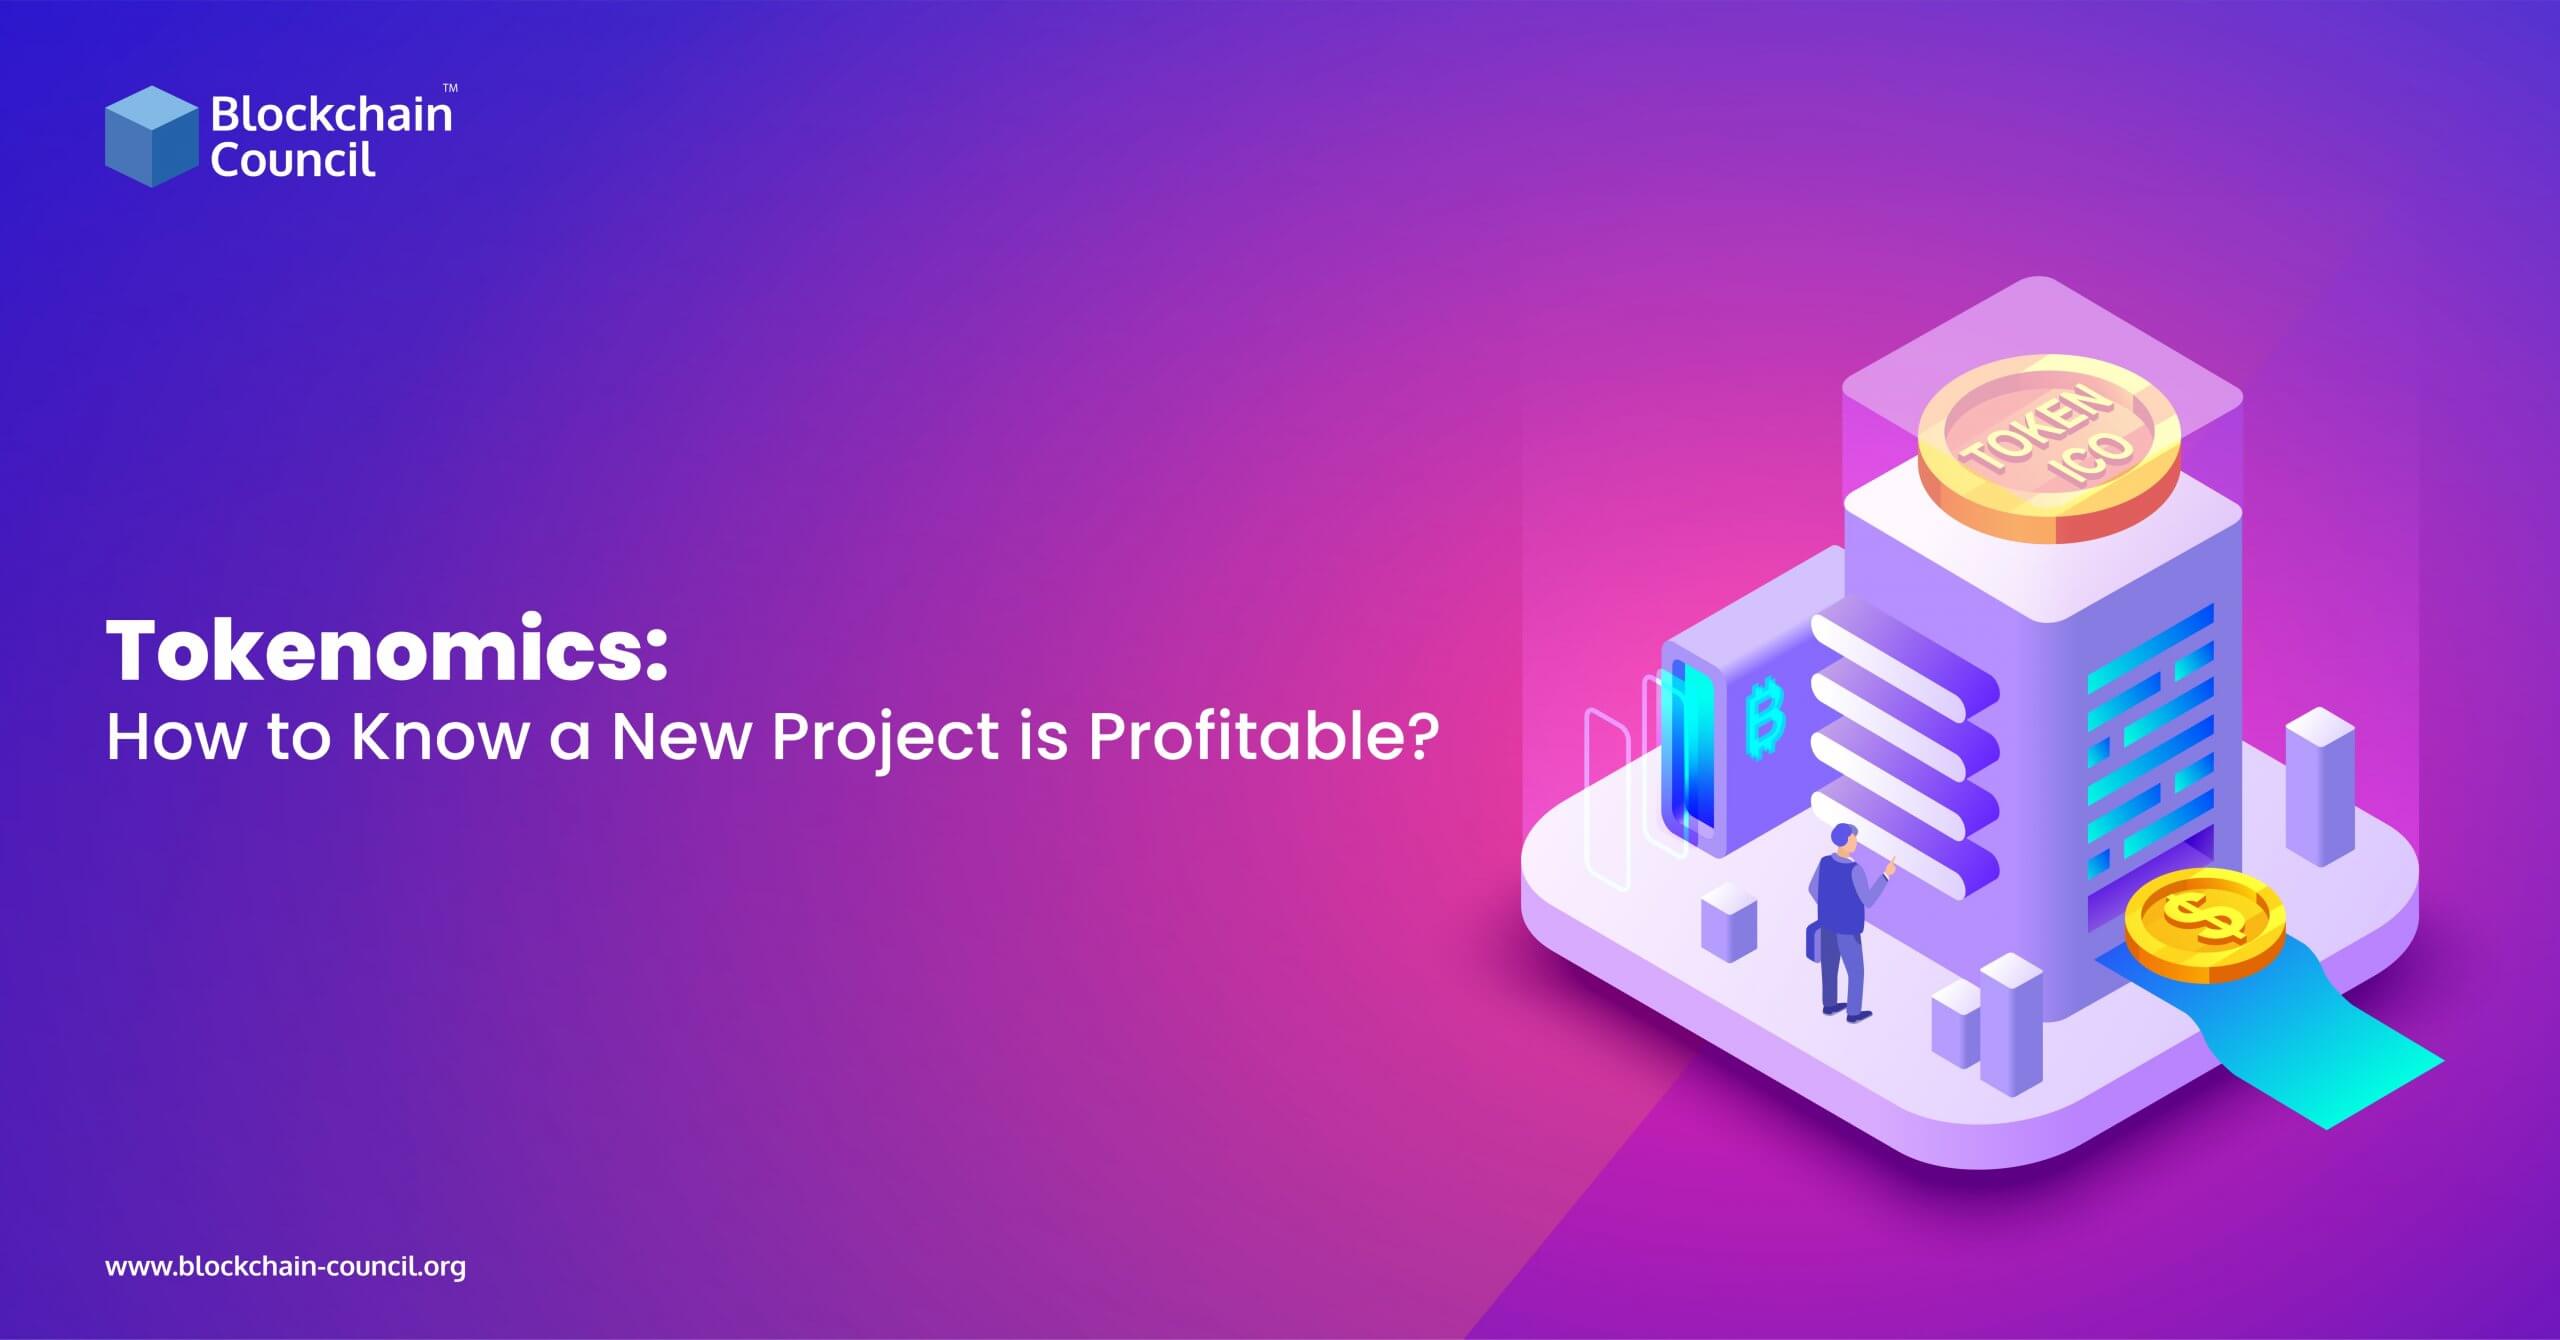 Tokenomics – How to Know a New Project is Profitable?